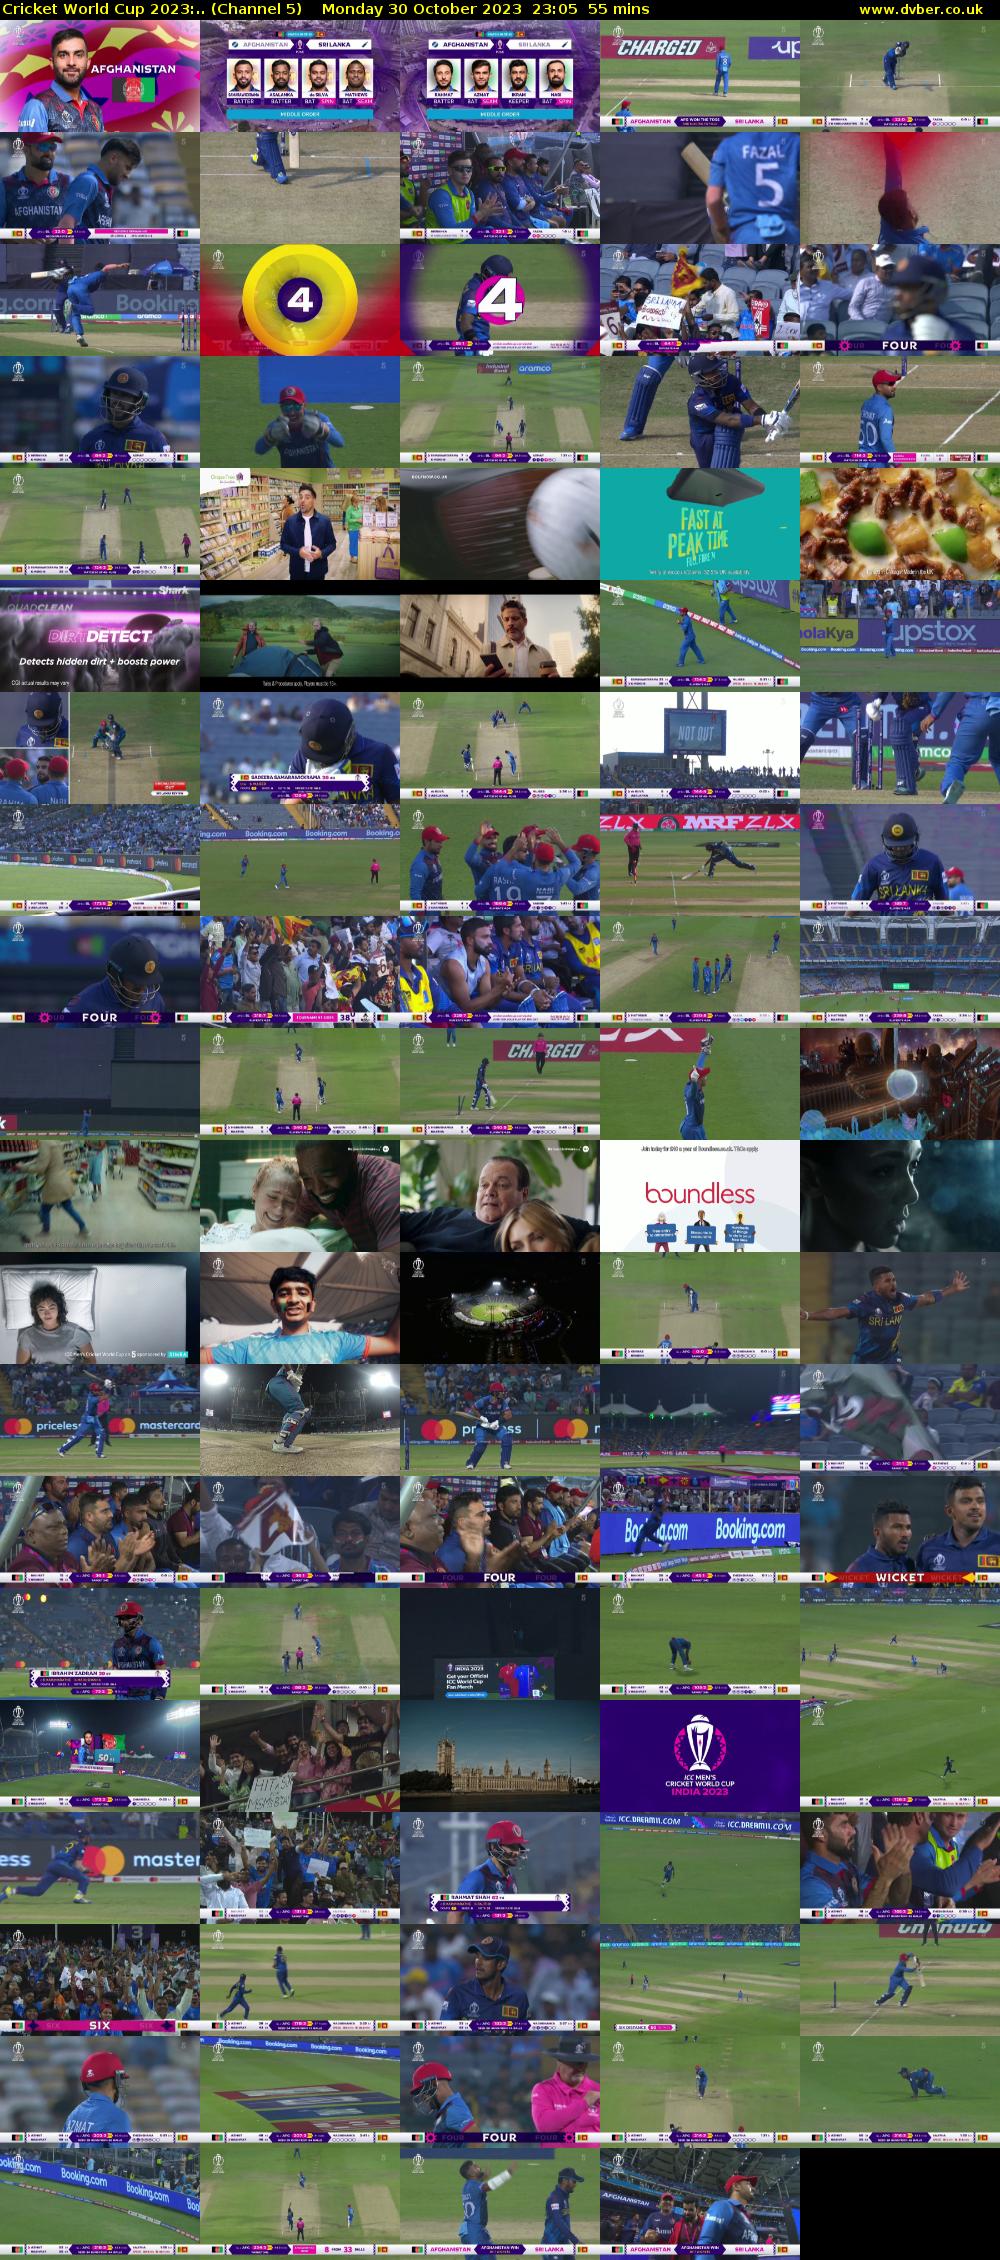 Cricket World Cup 2023:.. (Channel 5) Monday 30 October 2023 23:05 - 00:00